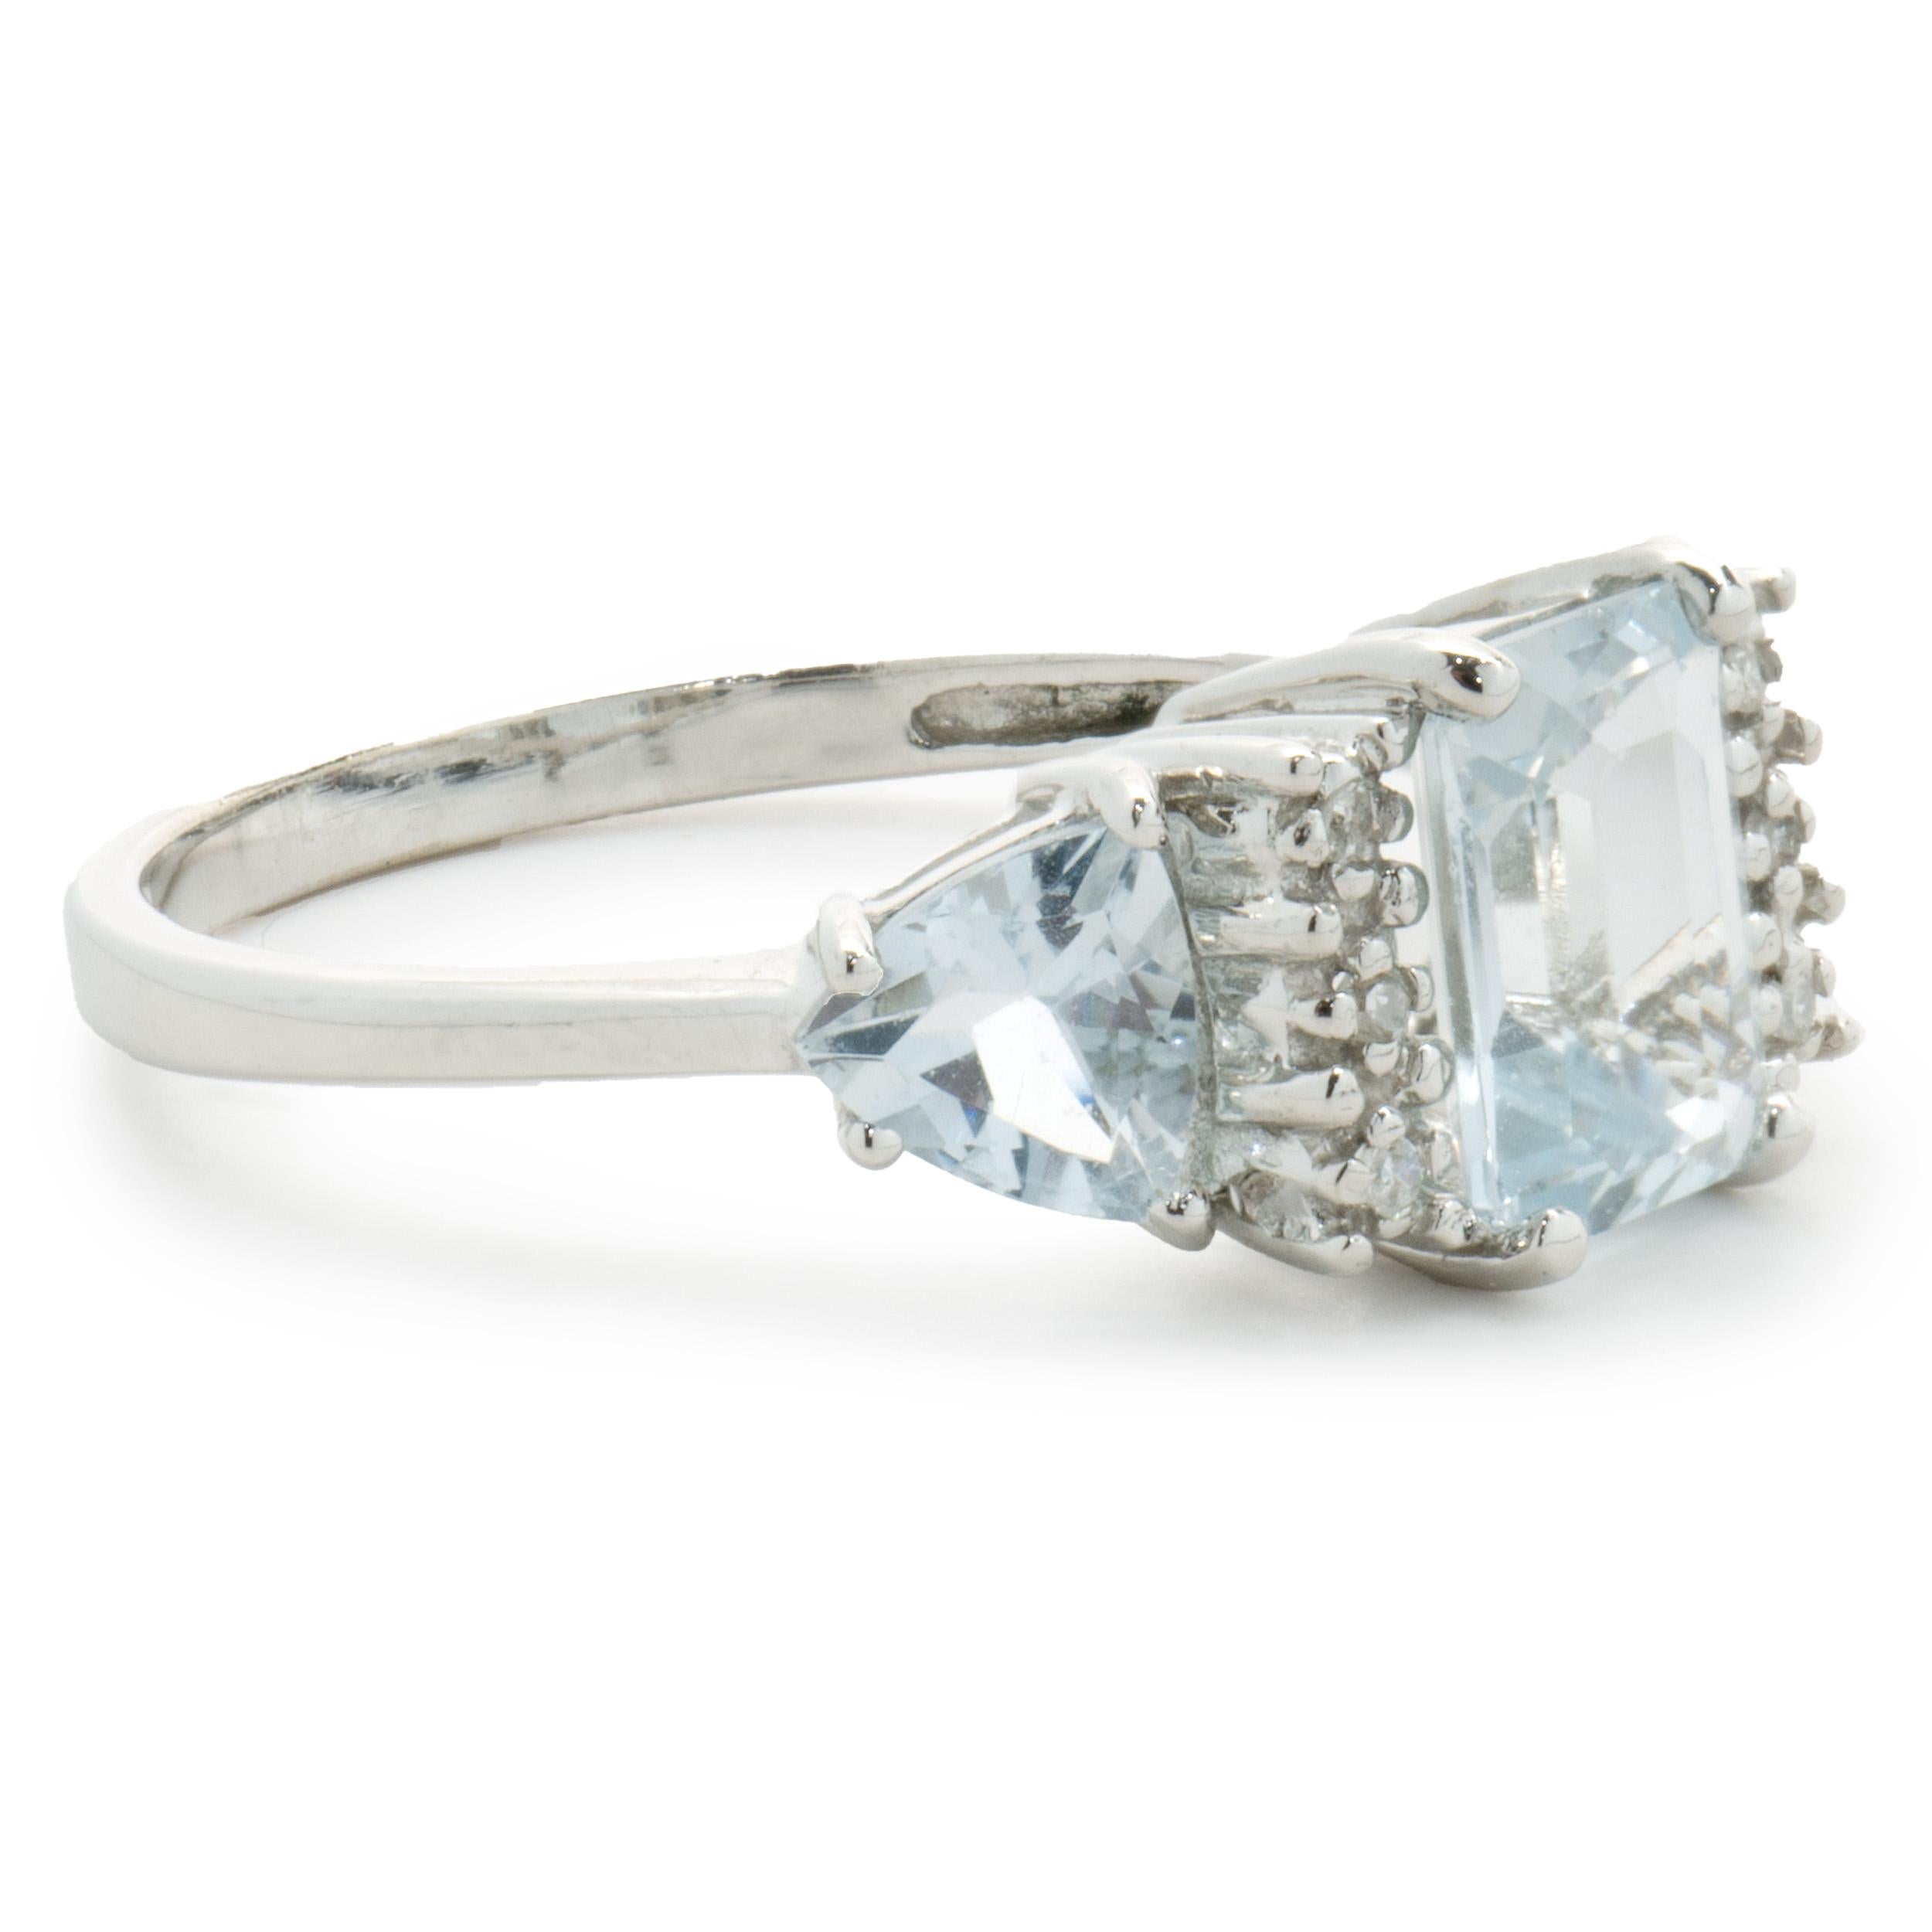 10 Karat White Gold Aquamarine and Diamond Ring In Excellent Condition For Sale In Scottsdale, AZ